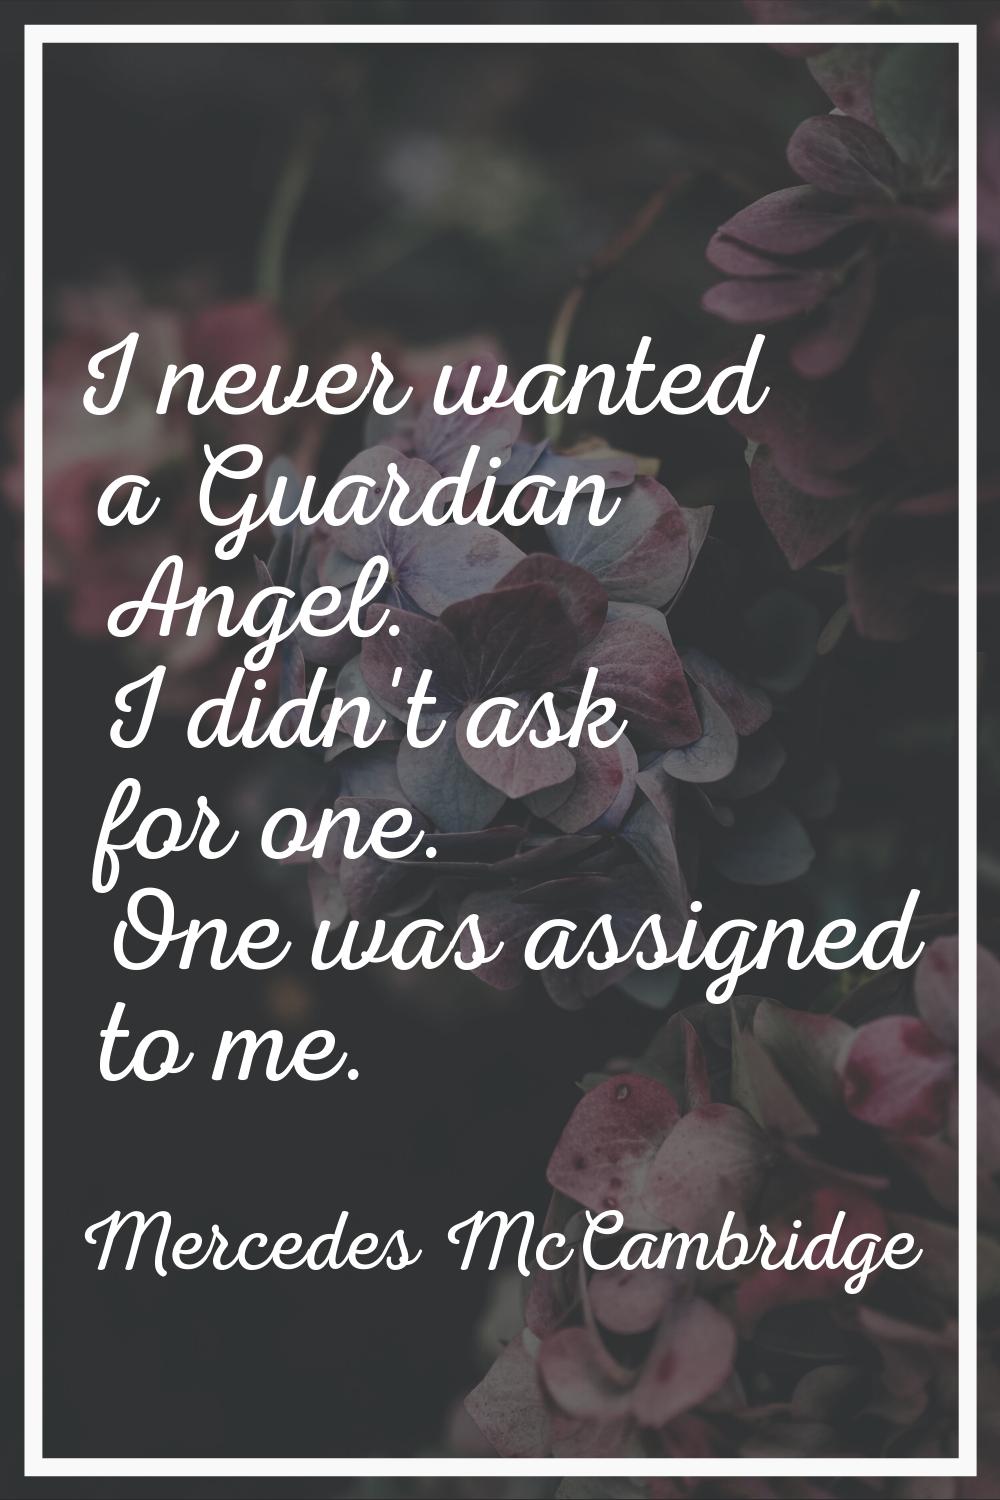 I never wanted a Guardian Angel. I didn't ask for one. One was assigned to me.